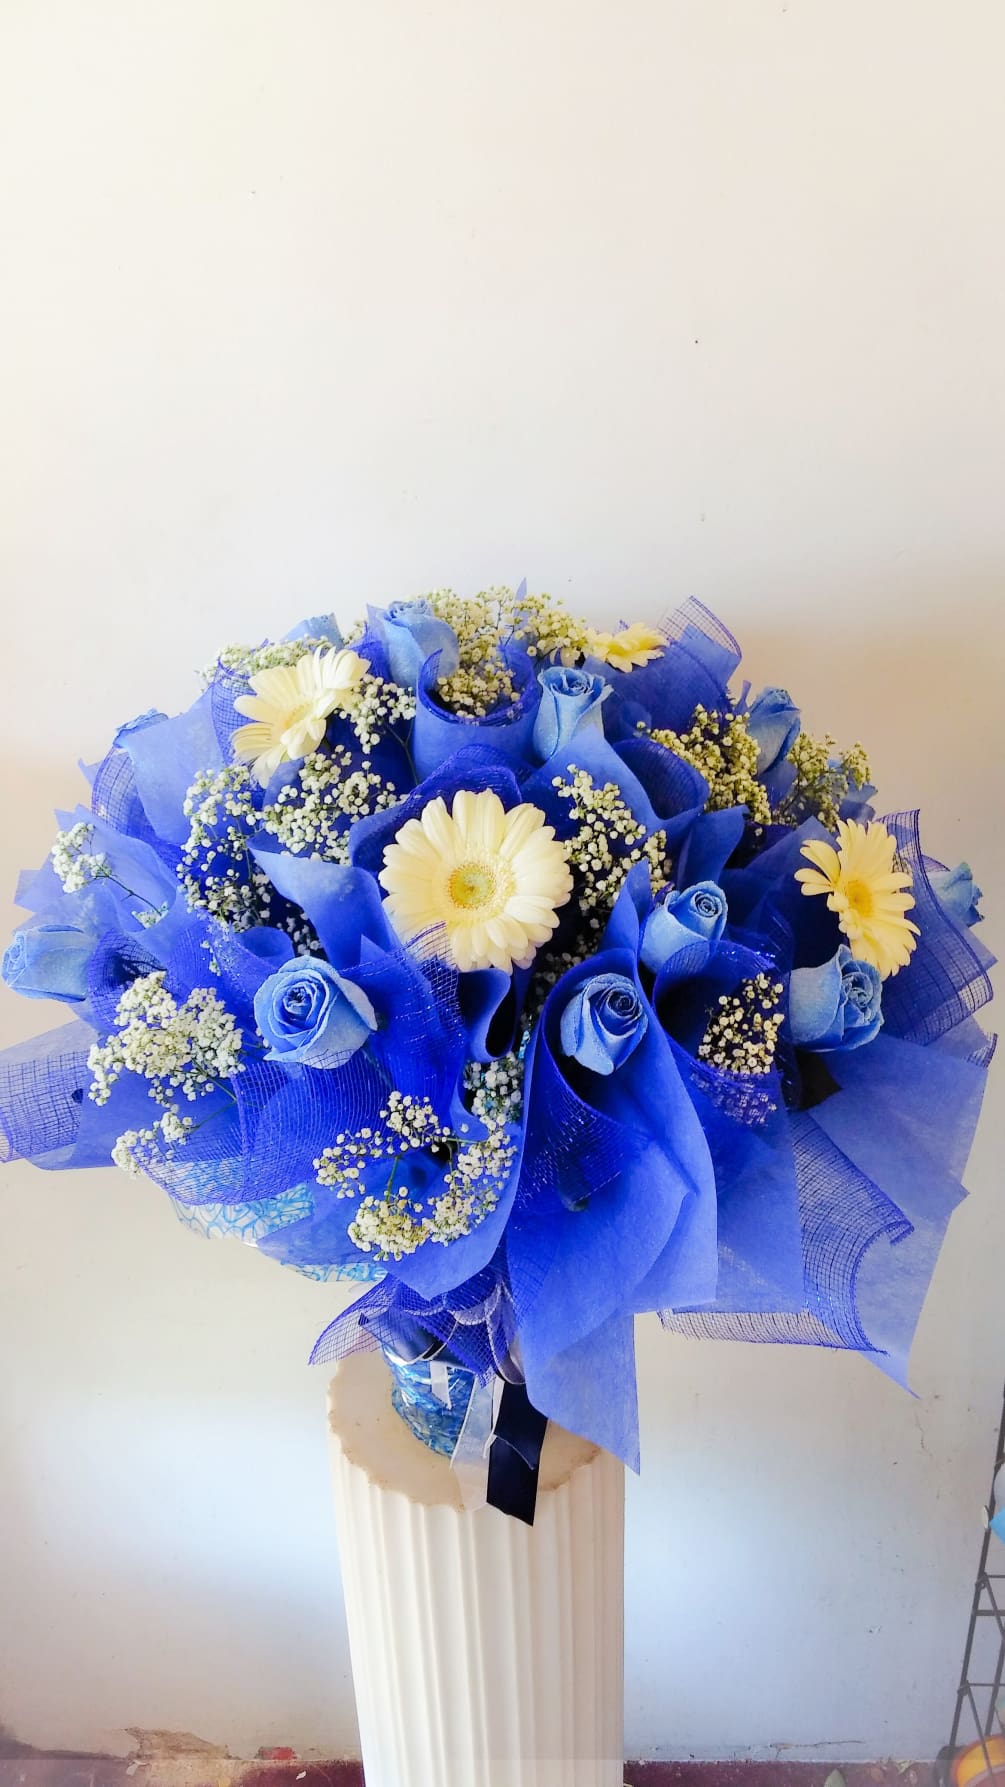 1 dz. blue roses with white gerbera daisy accents, elegantly wrapped Hong